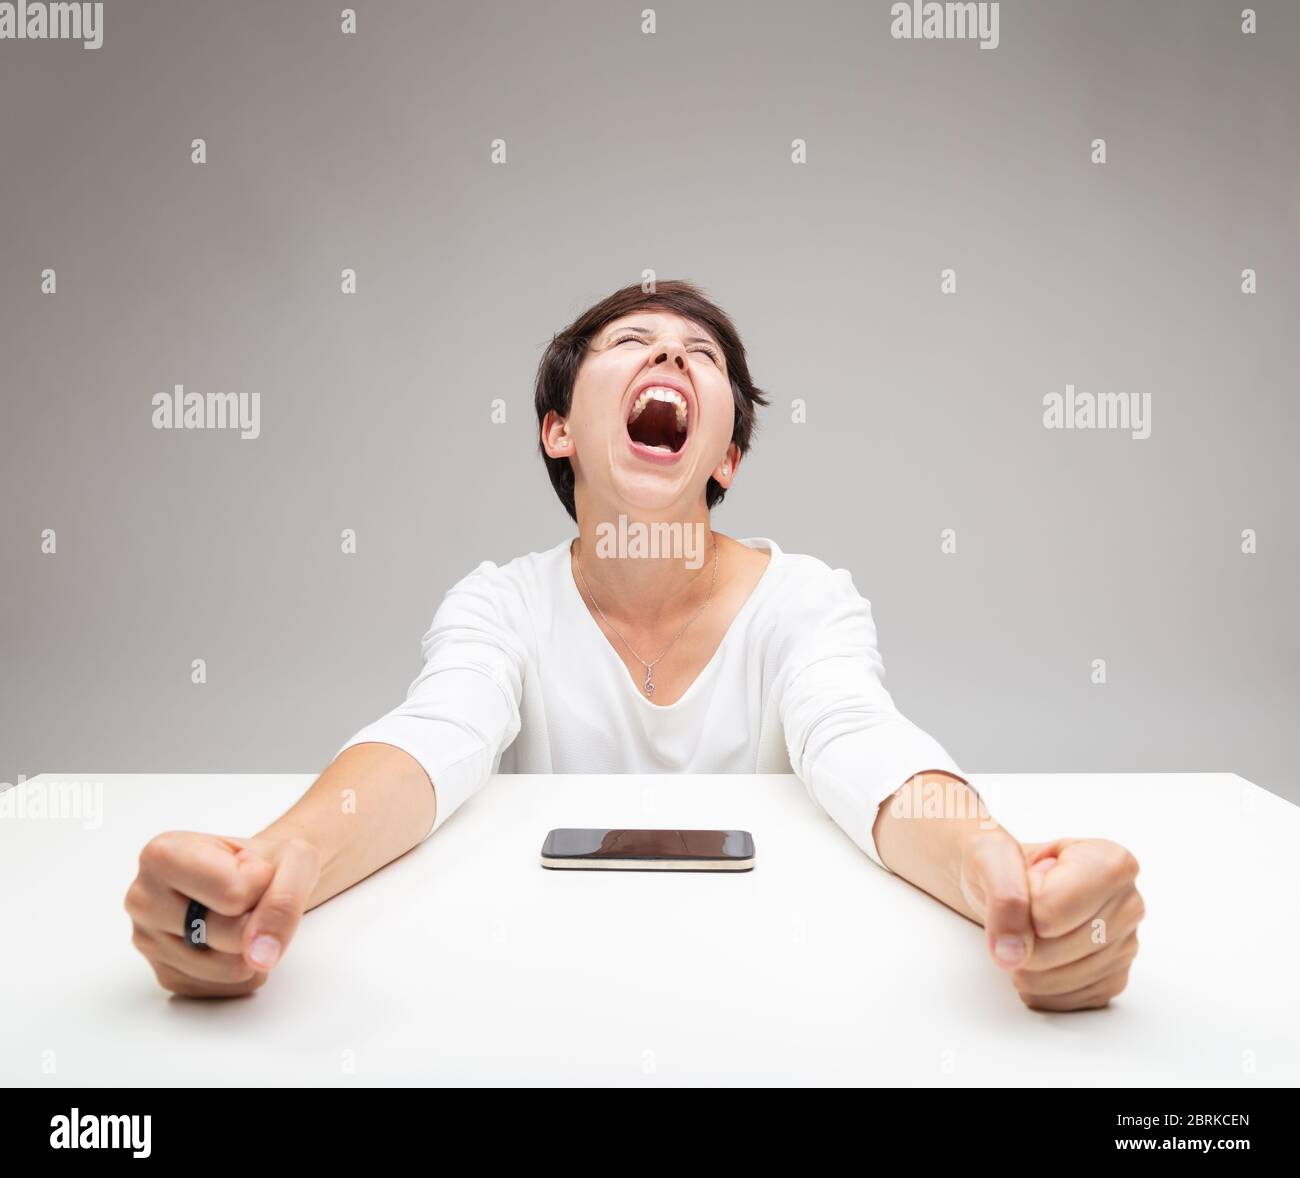 Frustrated woman throwing a temper tantrum clenching her fists and screaming at a mobile phone on the table in front of her Stock Photo